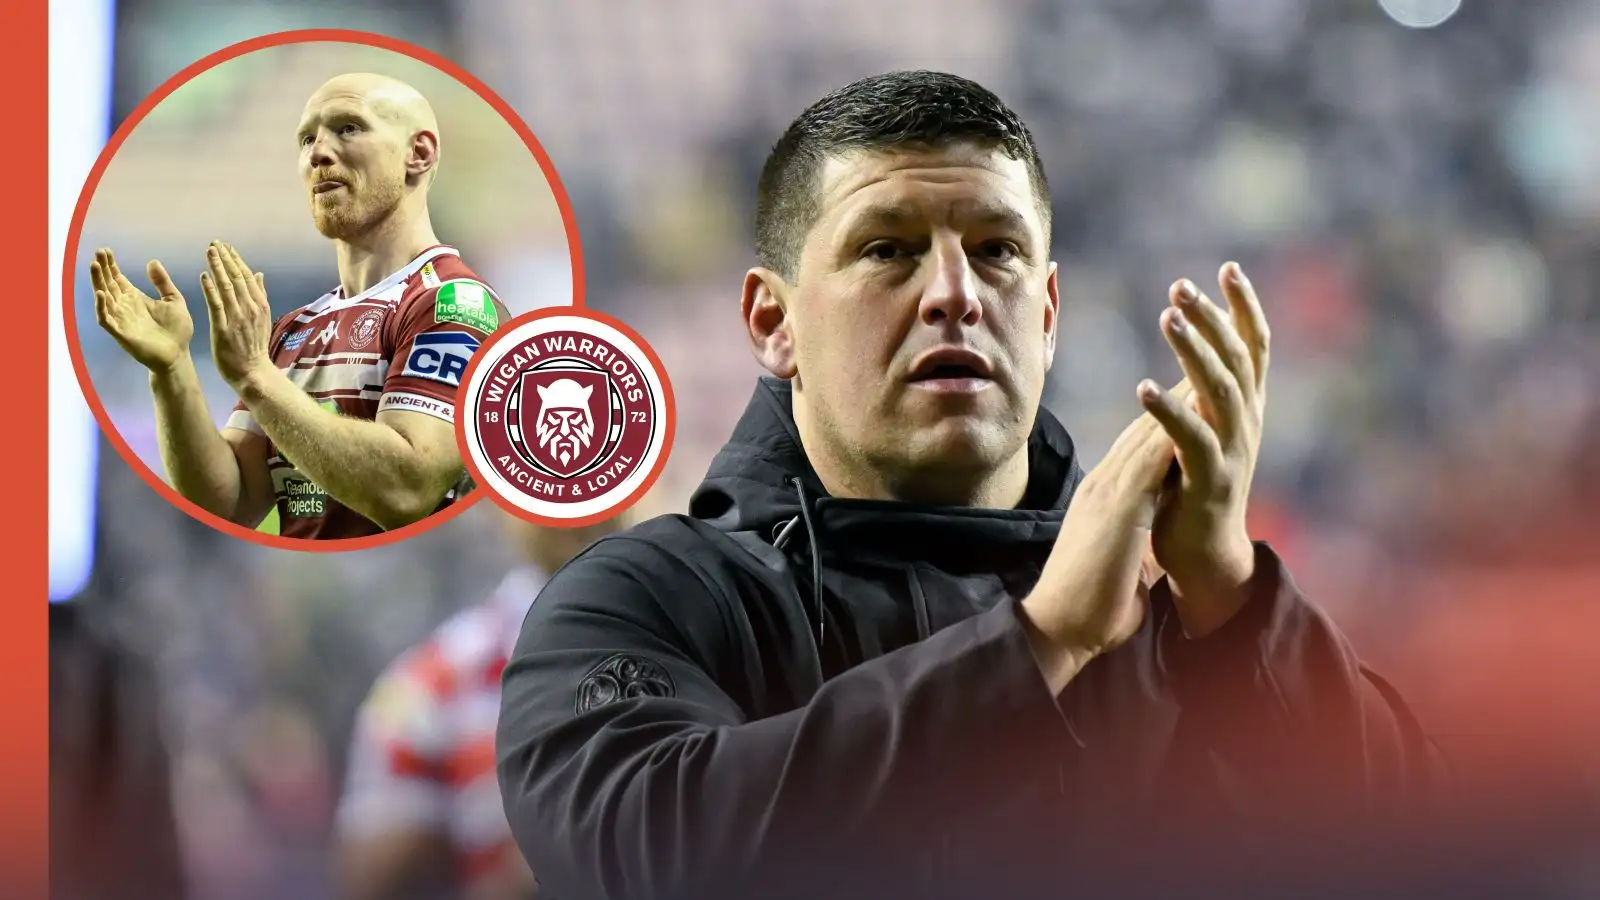 Inside Wigan Warriors’ conveyor belt of homegrown talent and promoting from within